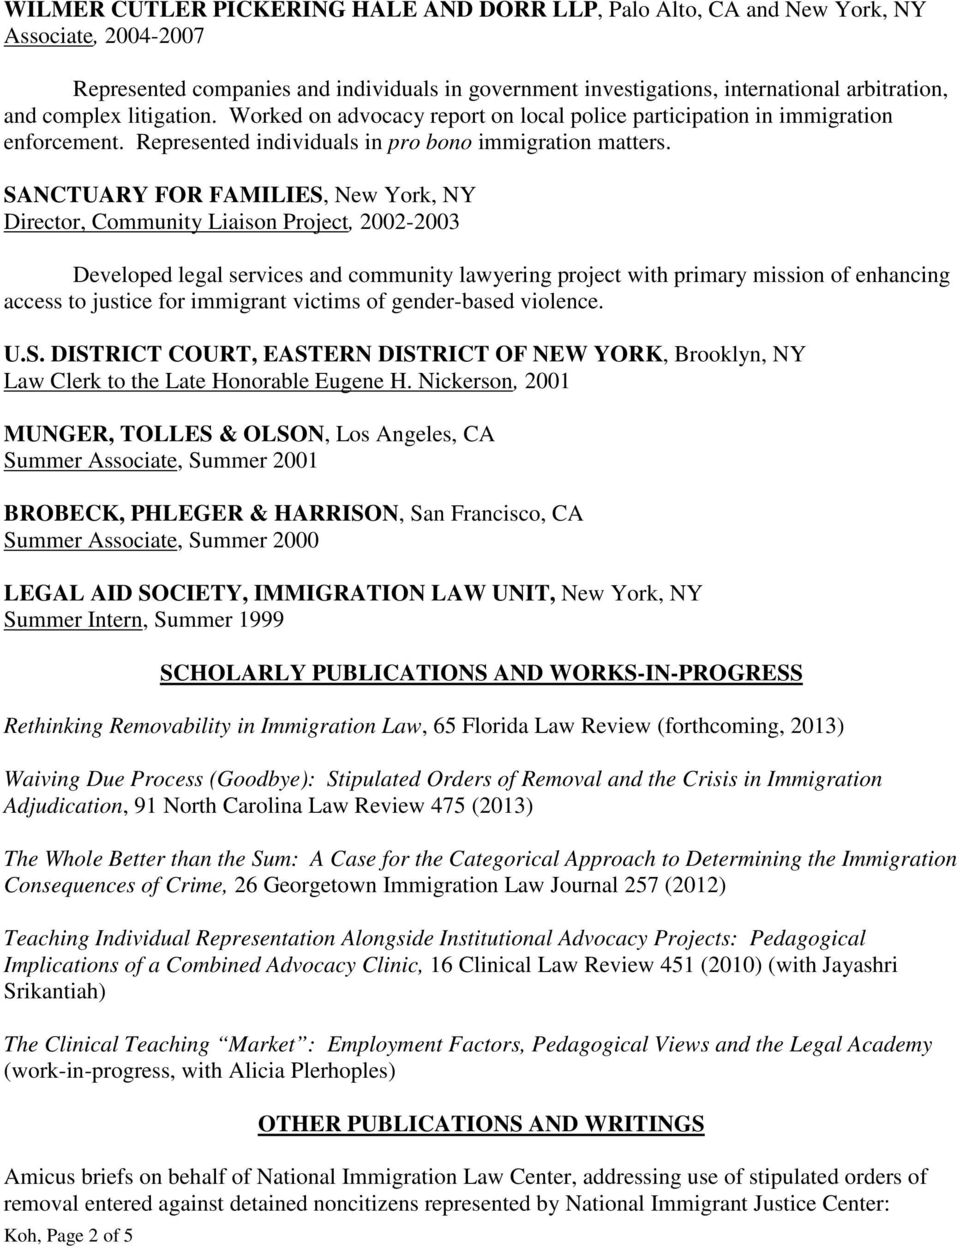 SANCTUARY FOR FAMILIES, New York, NY Director, Community Liaison Project, 2002-2003 Developed legal services and community lawyering project with primary mission of enhancing access to justice for